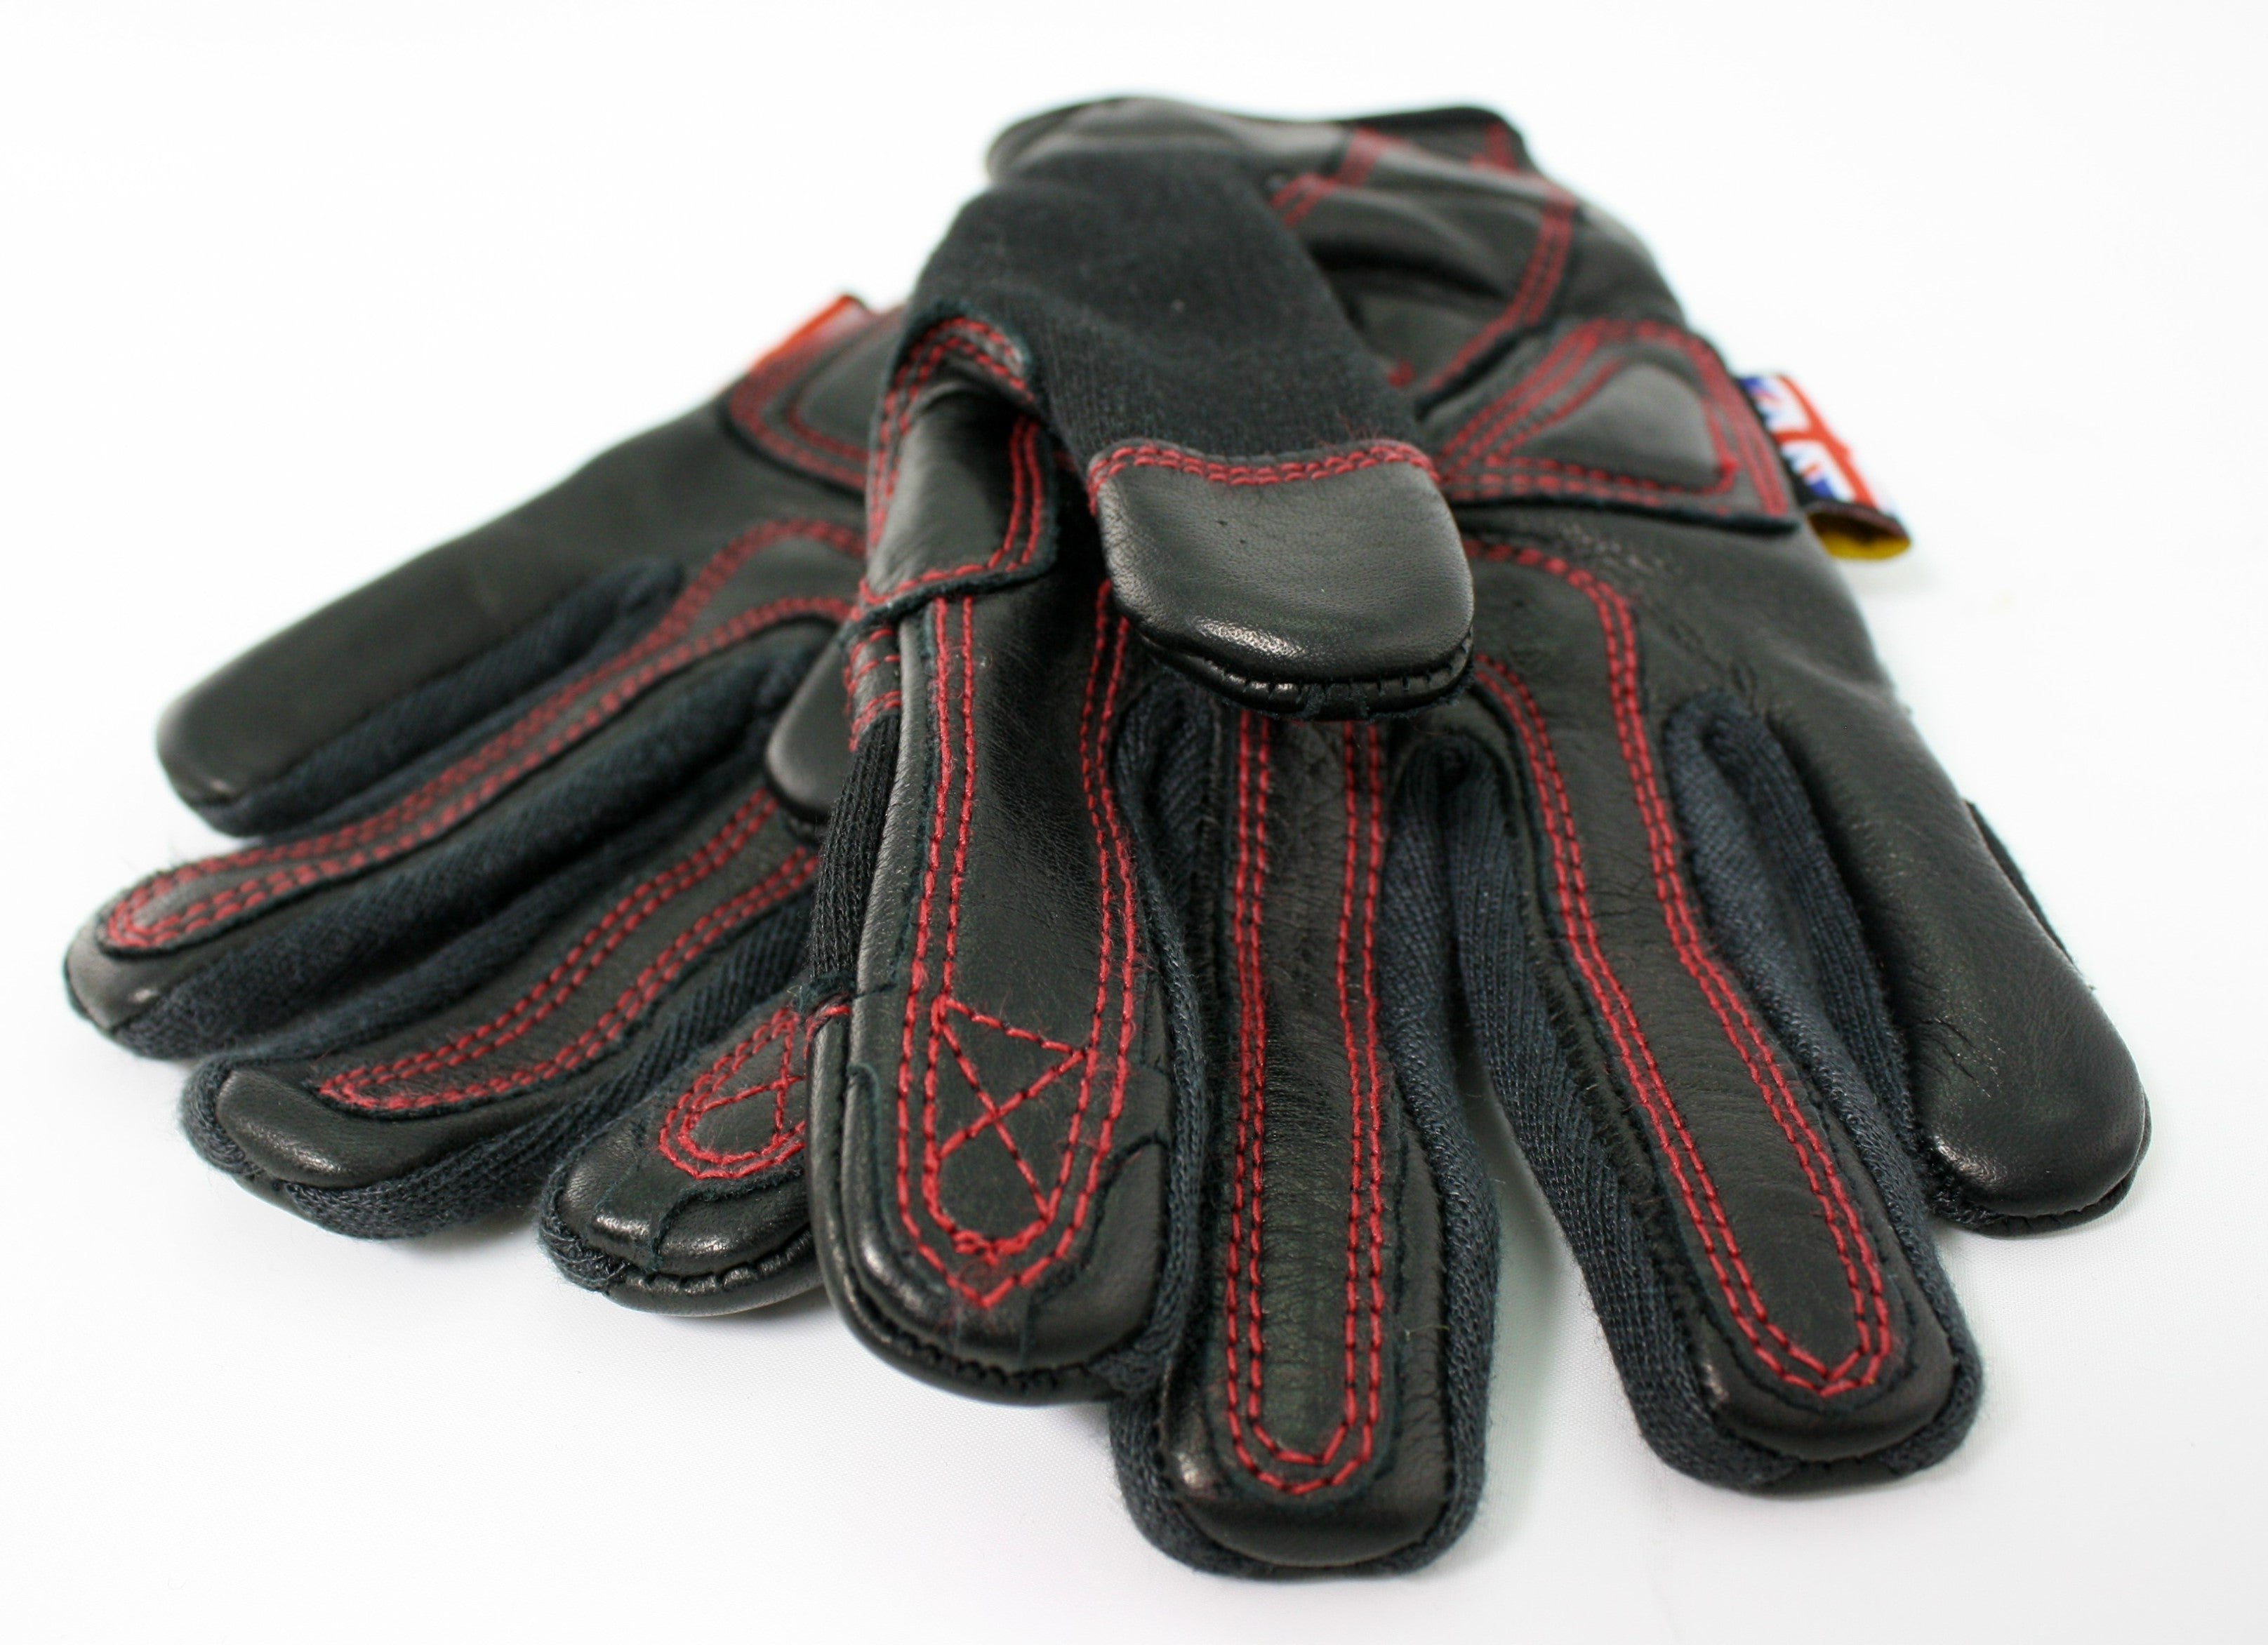 A pair of Phoenix gloves, one on top of the other, both palms up. Close up of the fingertips and stitching.